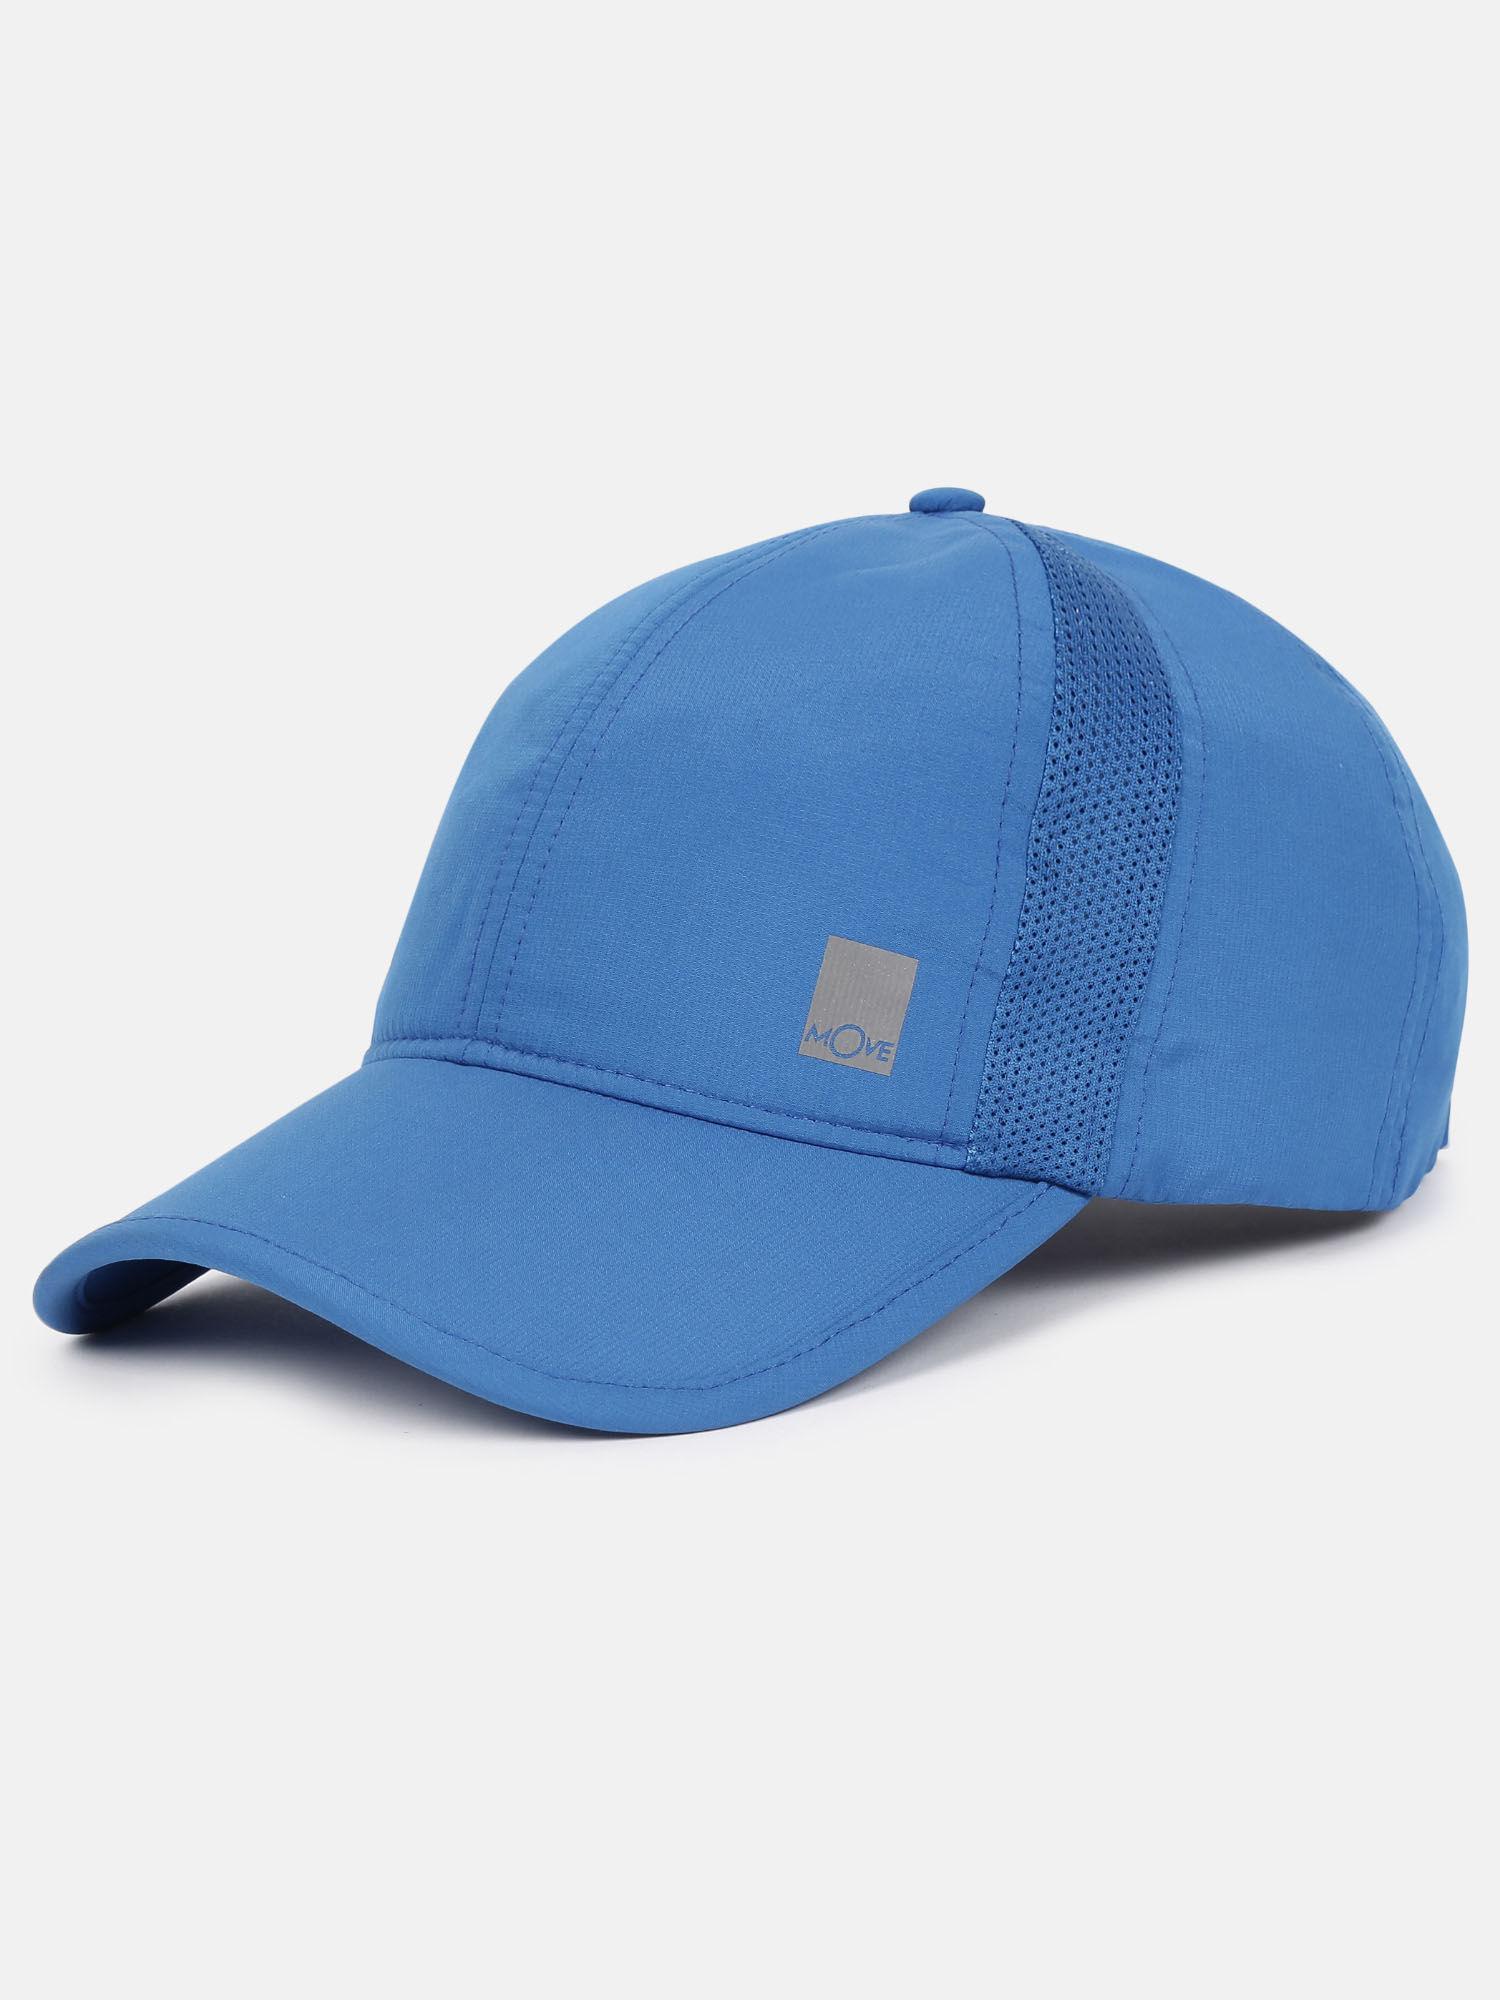 cp21-polyester-solid-cap-with-adjustable-back-closure-and-stay-dry-move-blue